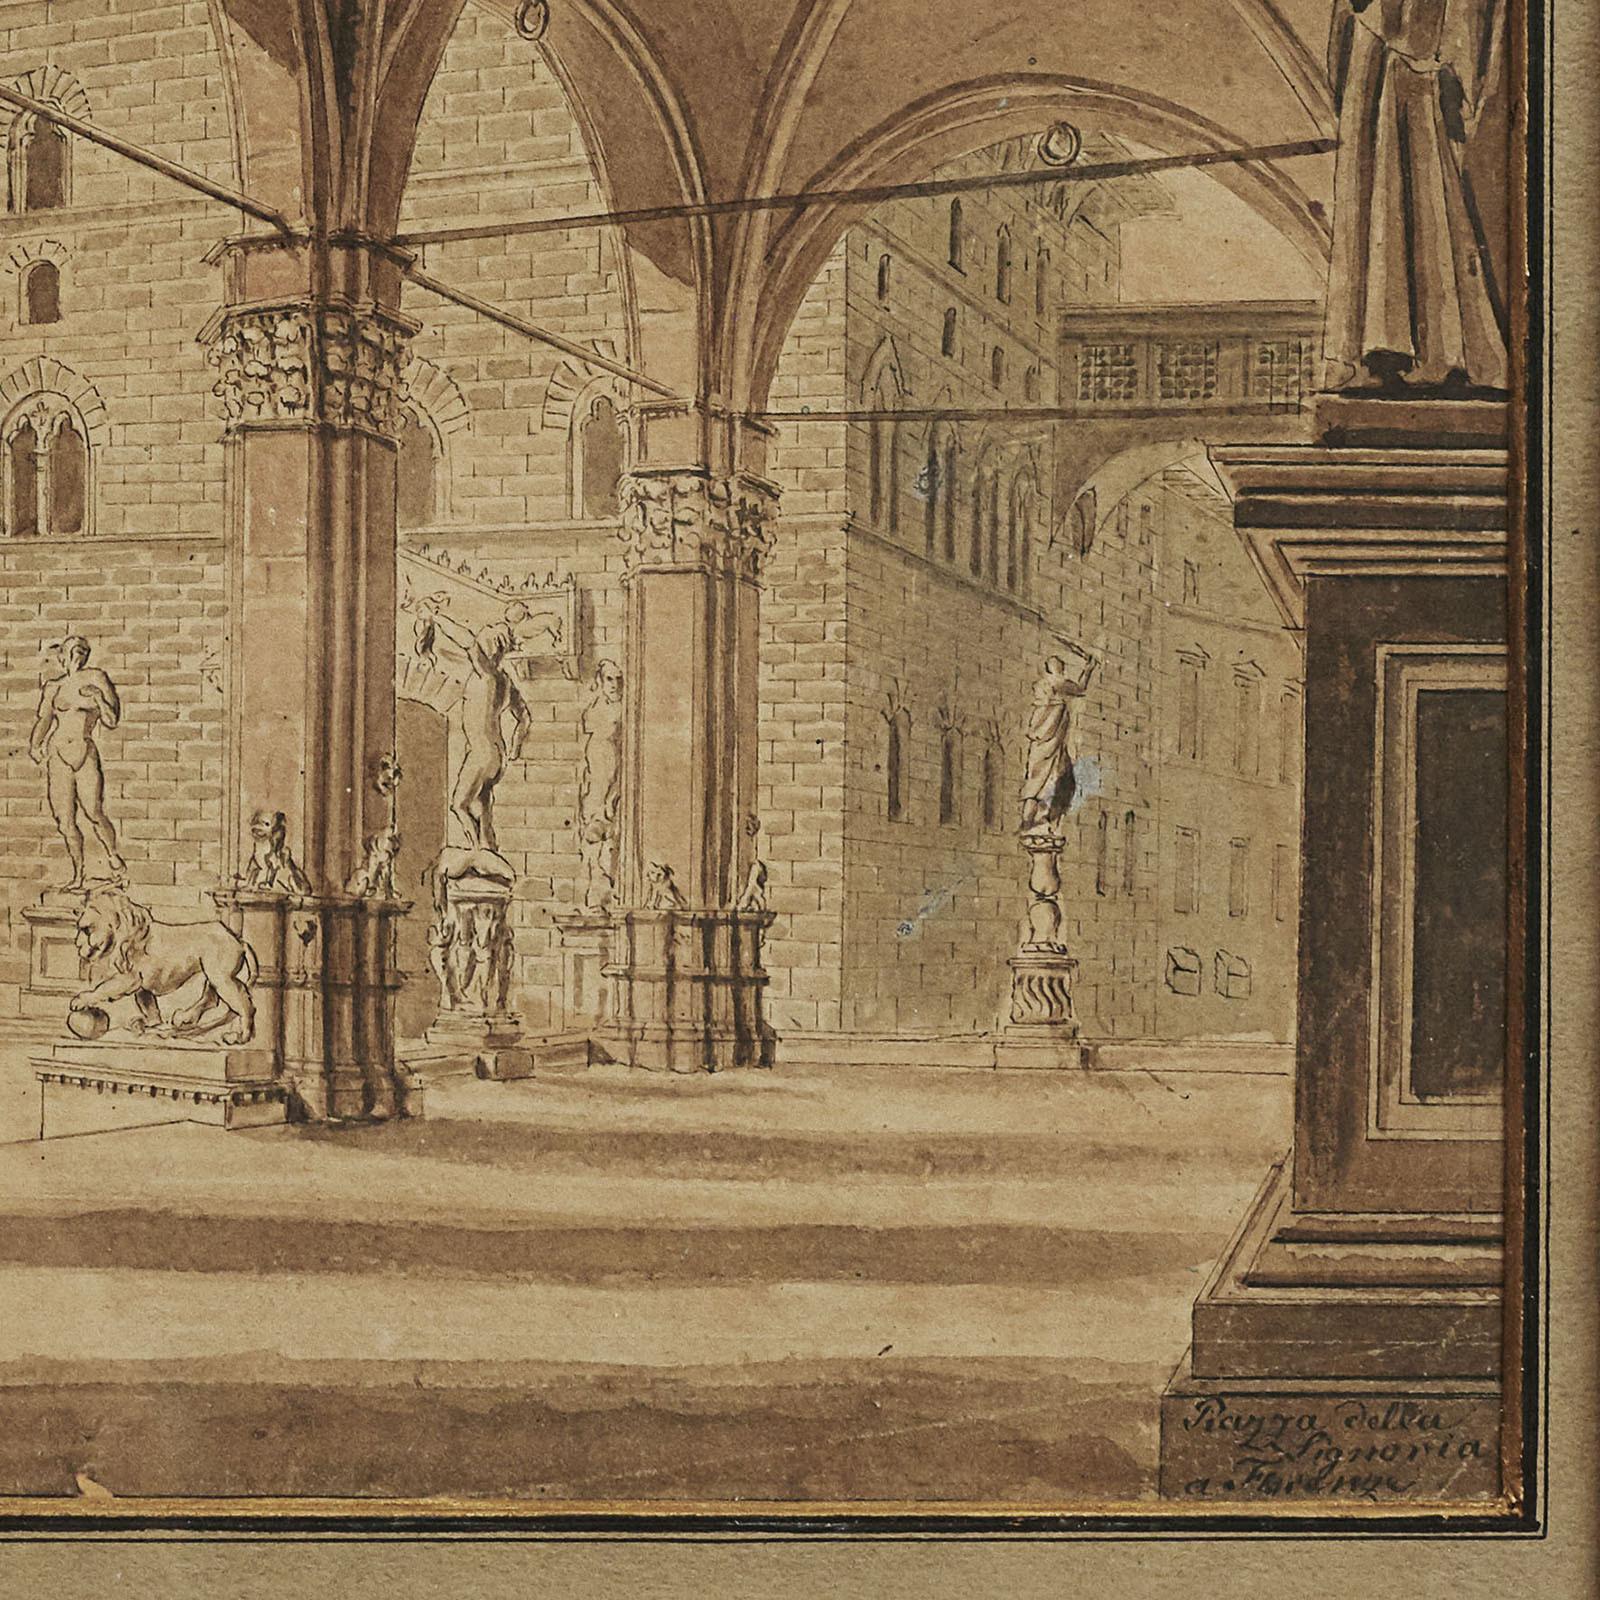 P. Gynther. Watercolor on paper. Motive: Palazzo della Signoria, Florence. Signed P. Gynther, 1822.